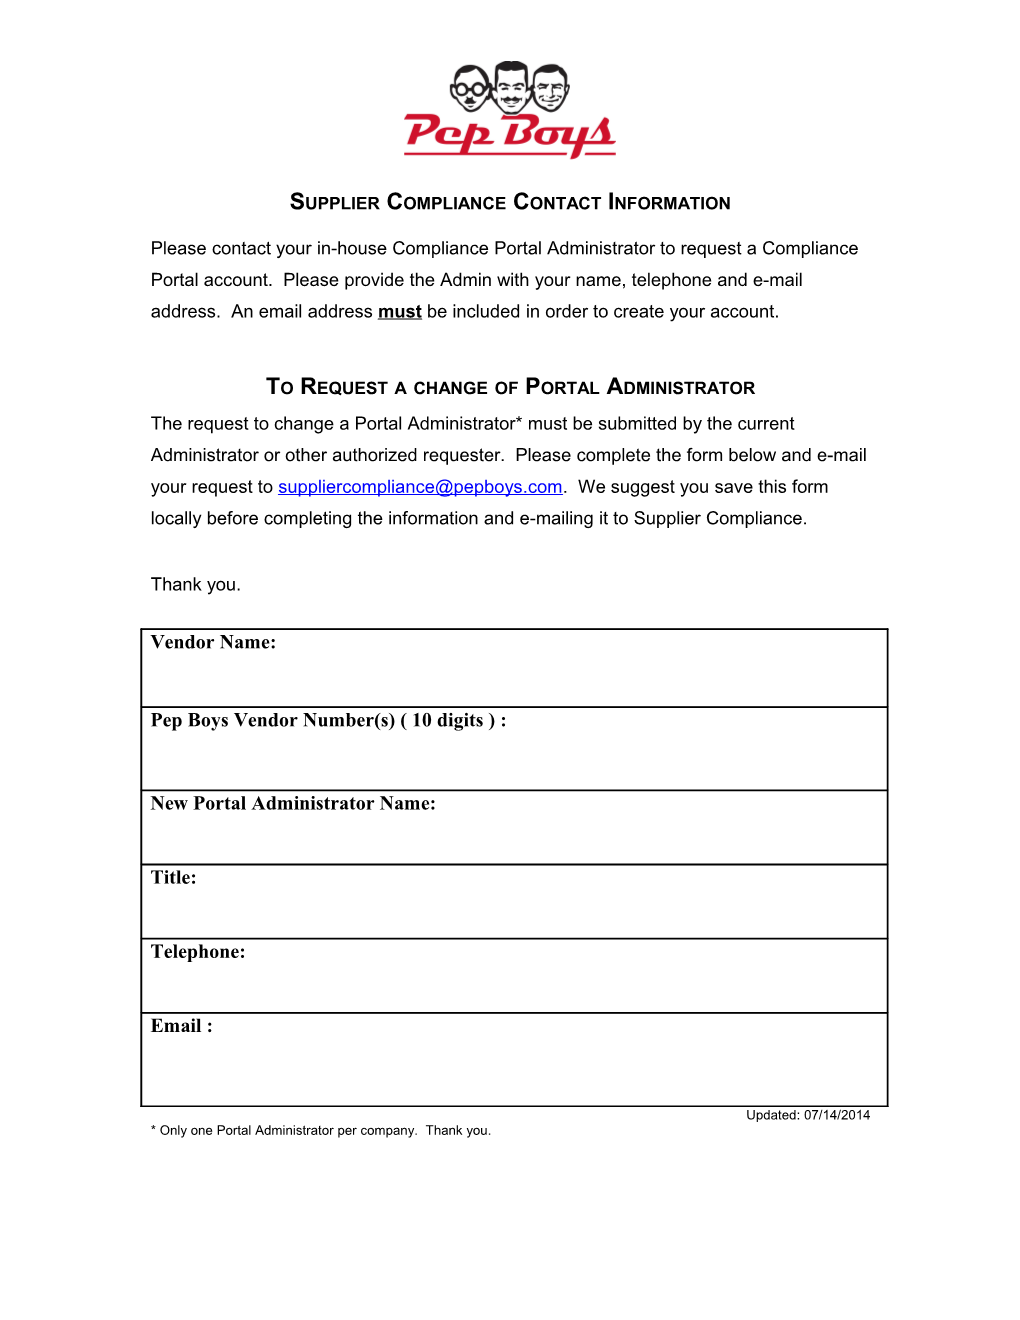 Supplier Compliance Contact Information